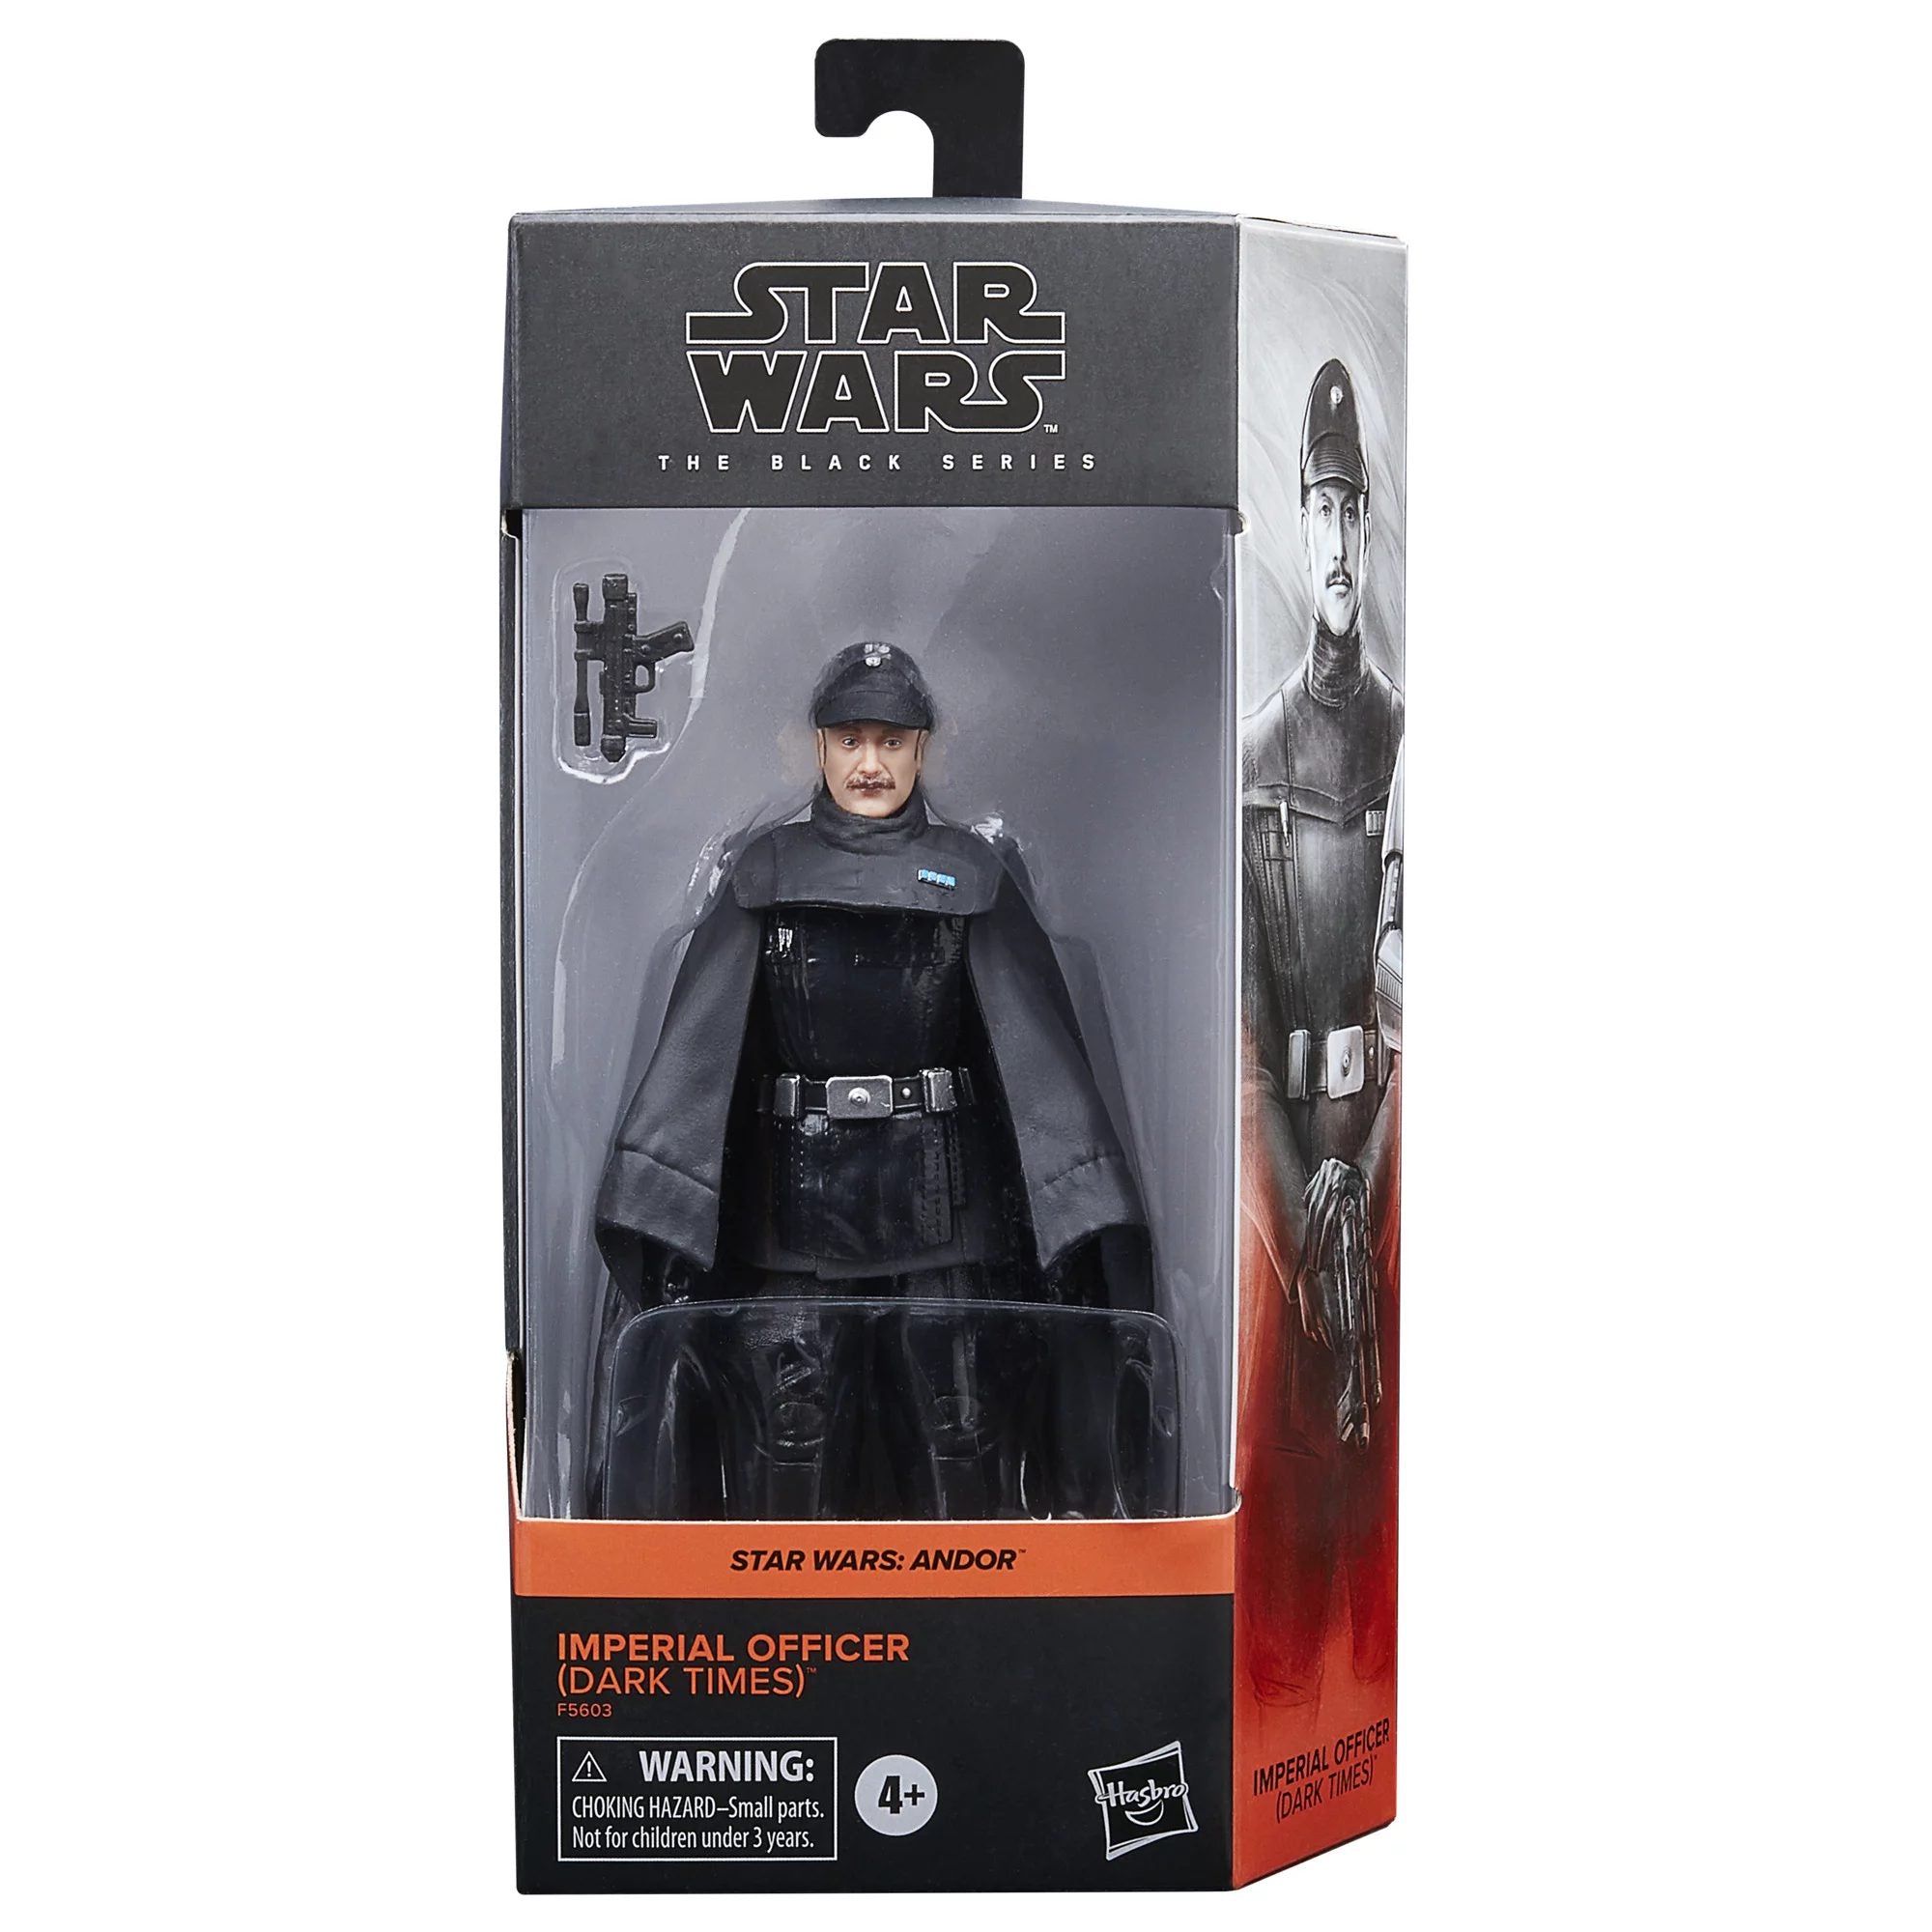 Imperial Officer Walmart Exclusive, Star Wars The Black Series